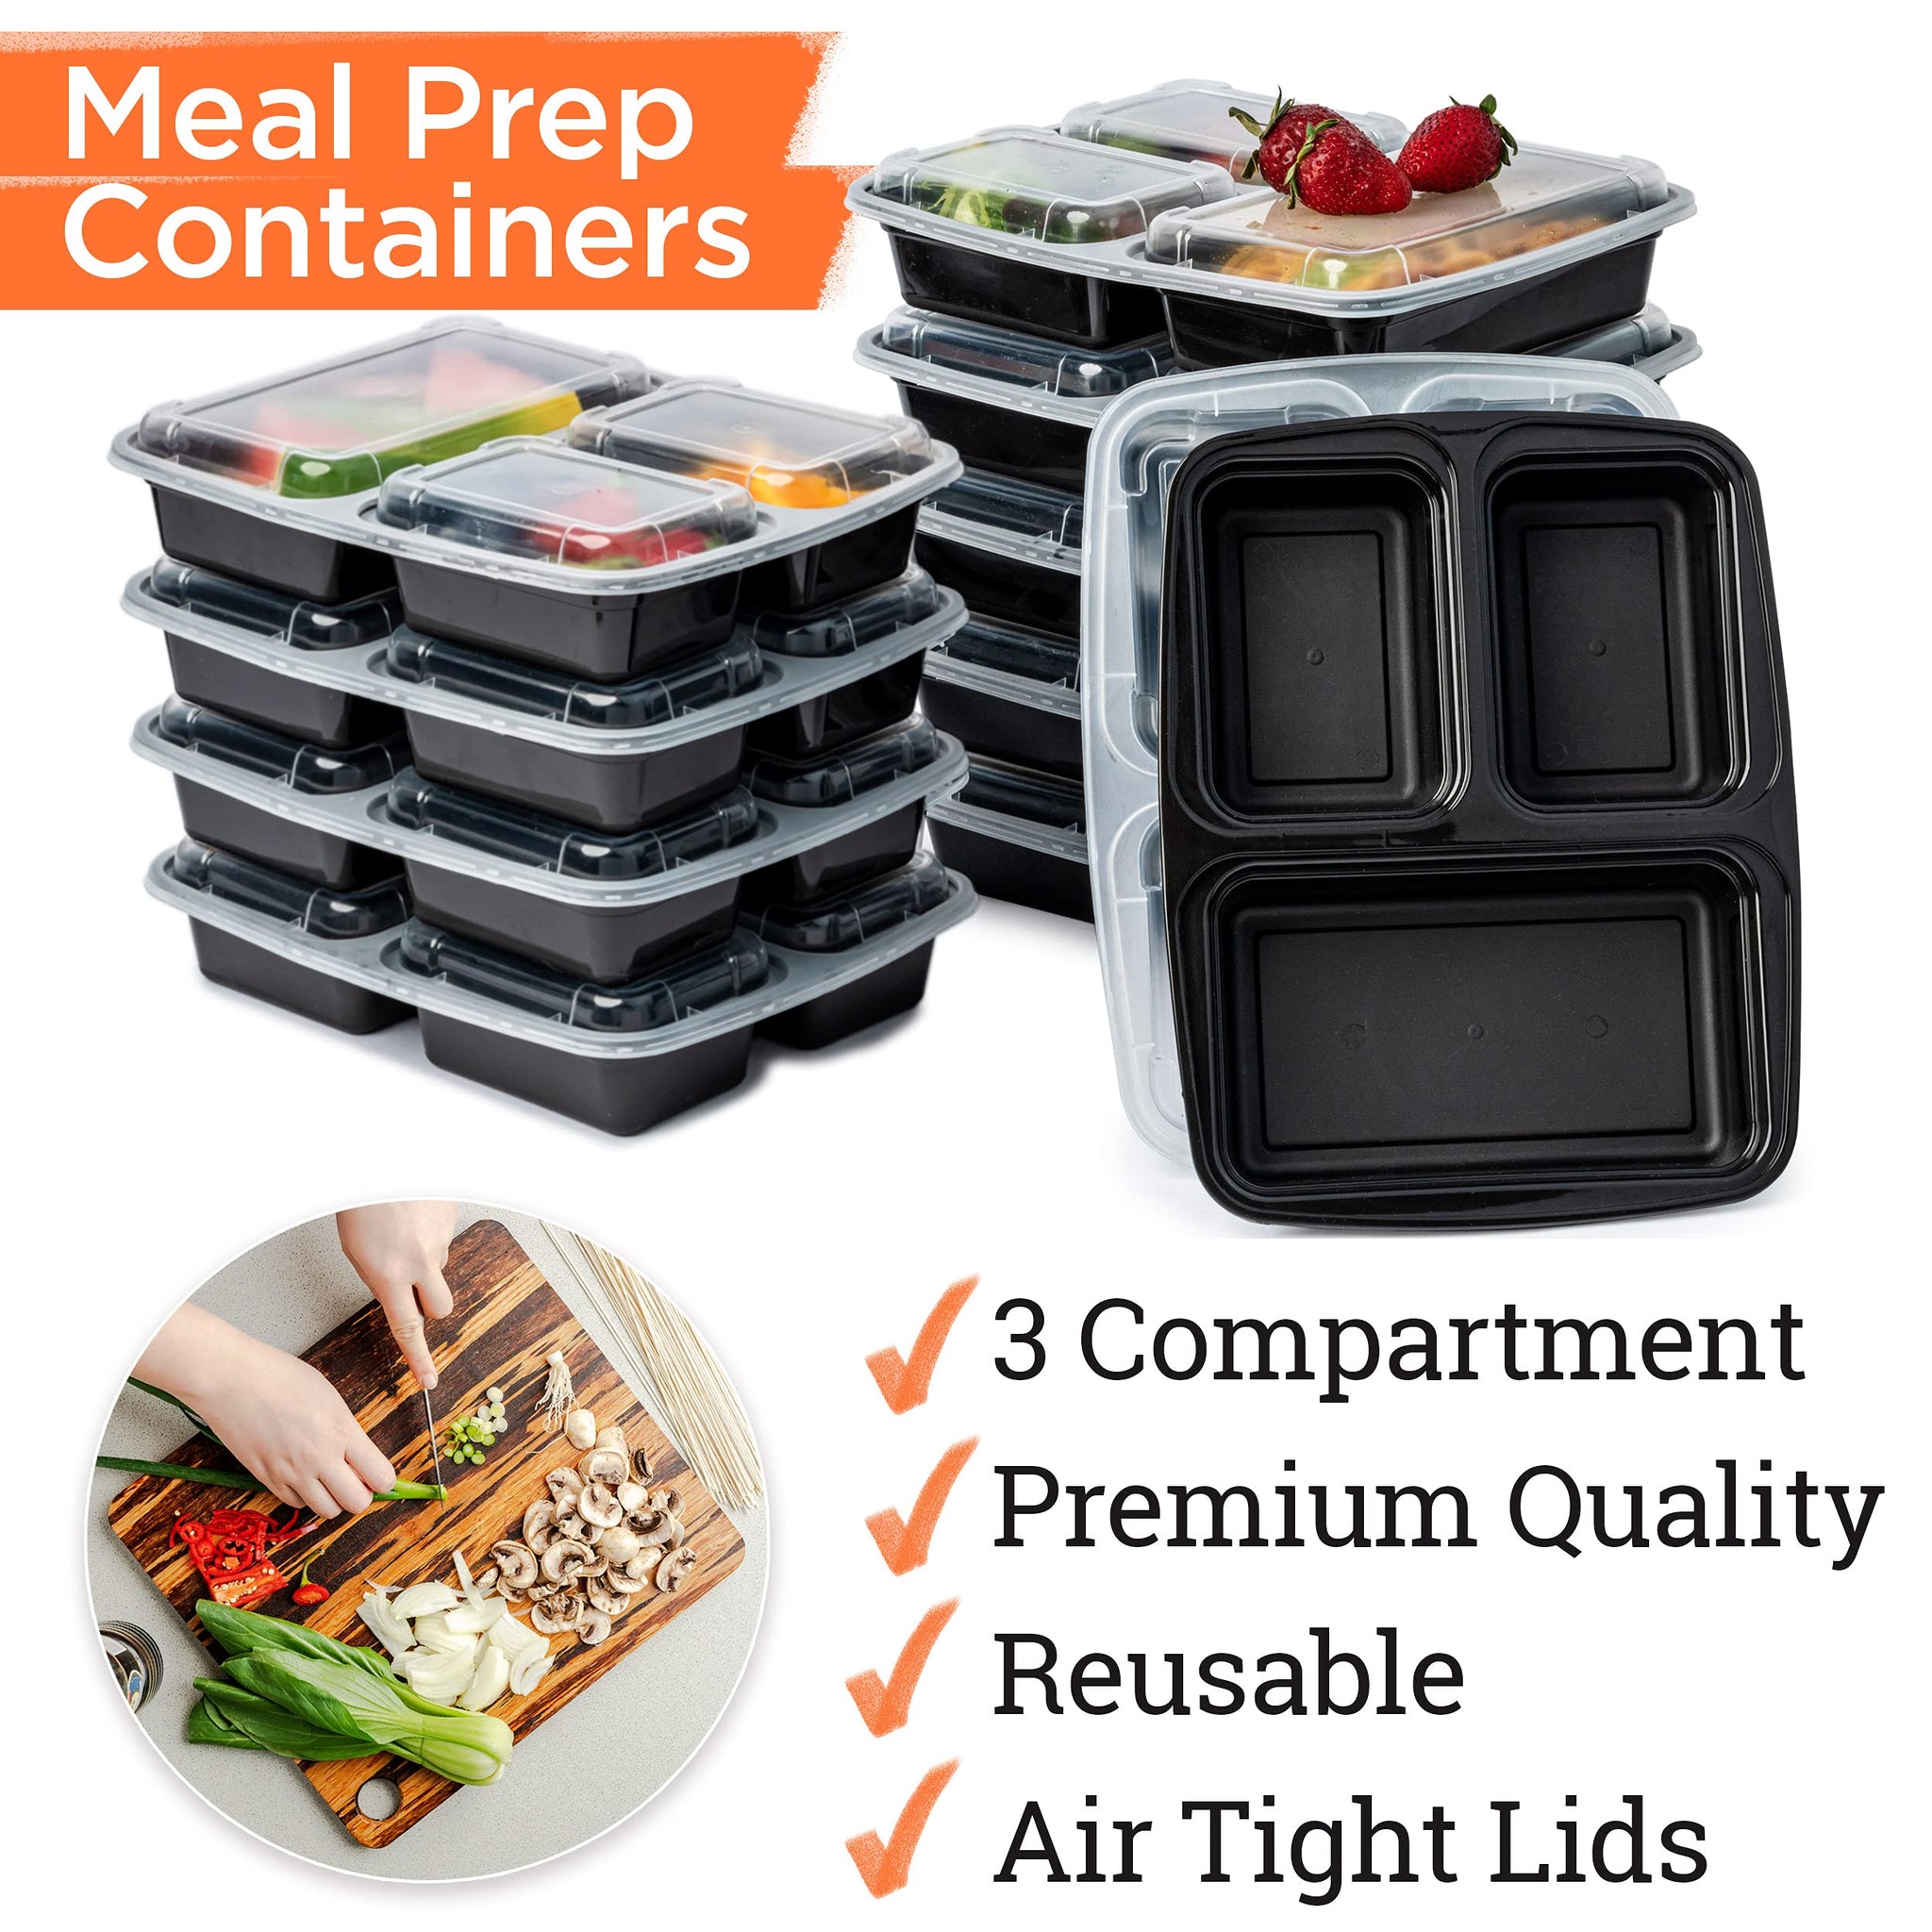 3 Compartment (10 Pack) Premium BPA Free Reusable Meal Prep Containers